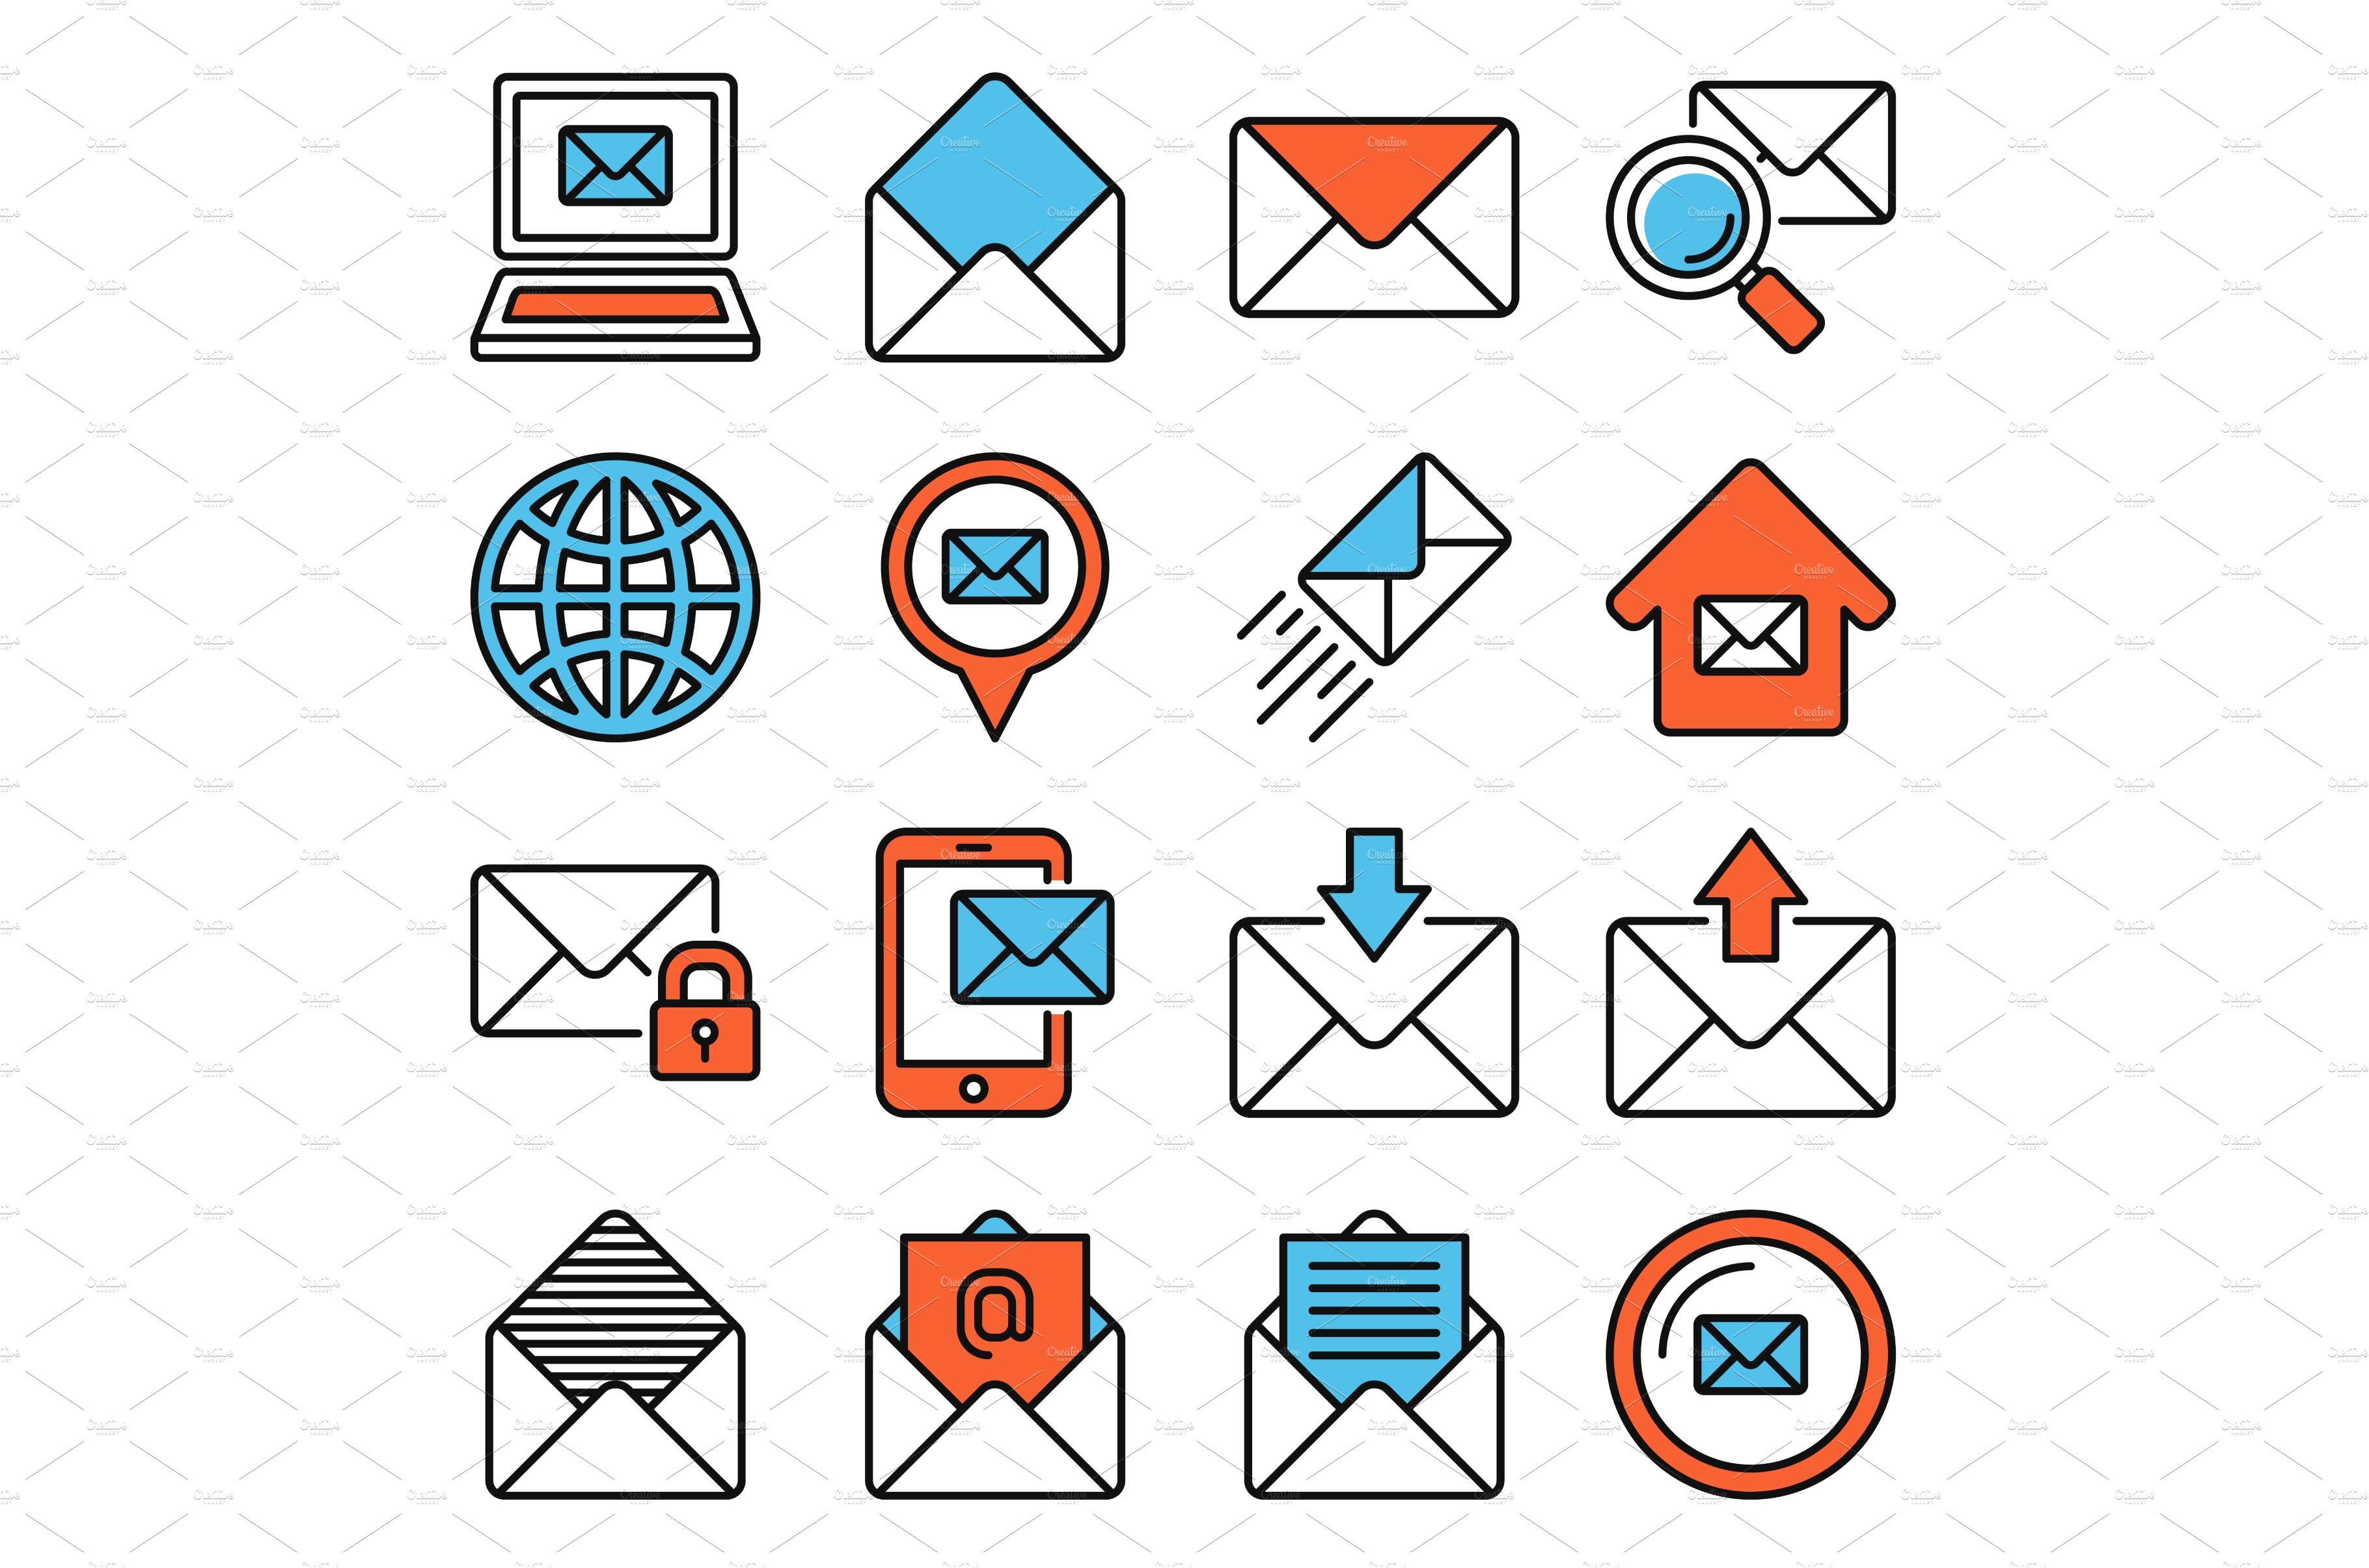 Email and Message Icons Set on White cover image.